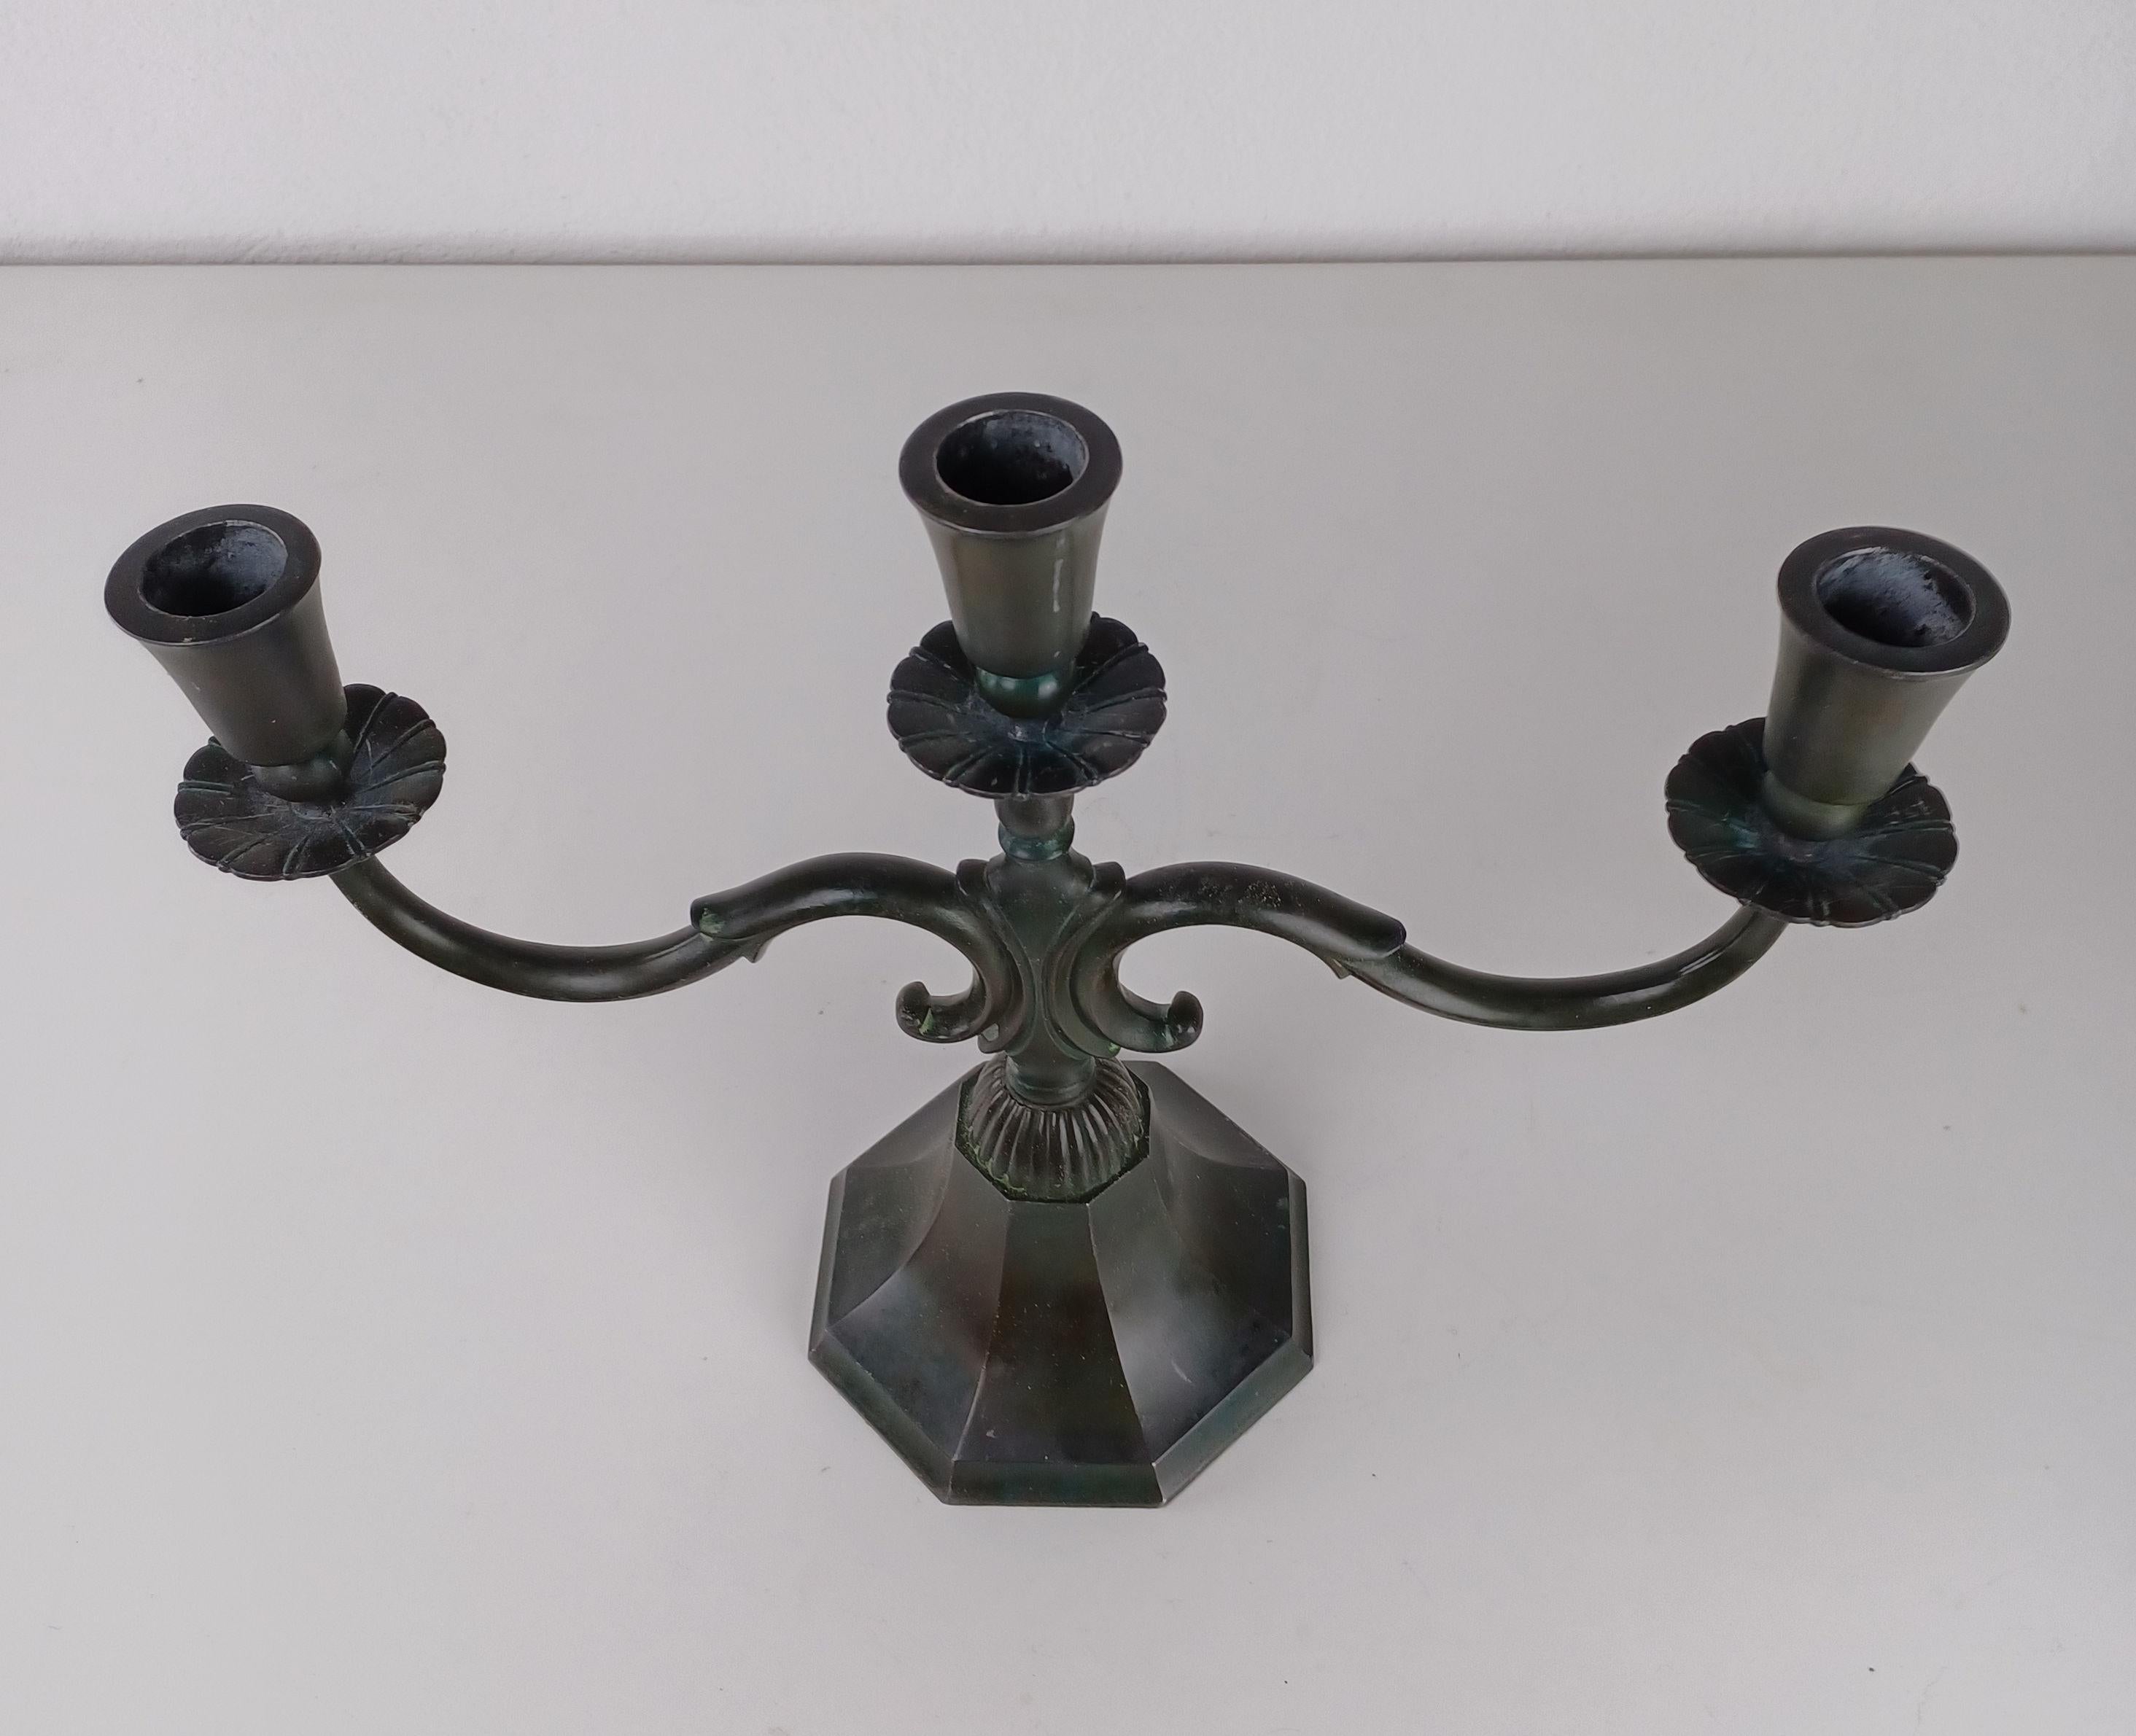 1920s art deco Danish Just Andersen disco metal candelabra.

The candlelabra is in good vintage condition and marked with Just. Andersens triangle mark. 

Just Andersen 1884-1943 was born in Godhavn on the Disko island, which is located on the west